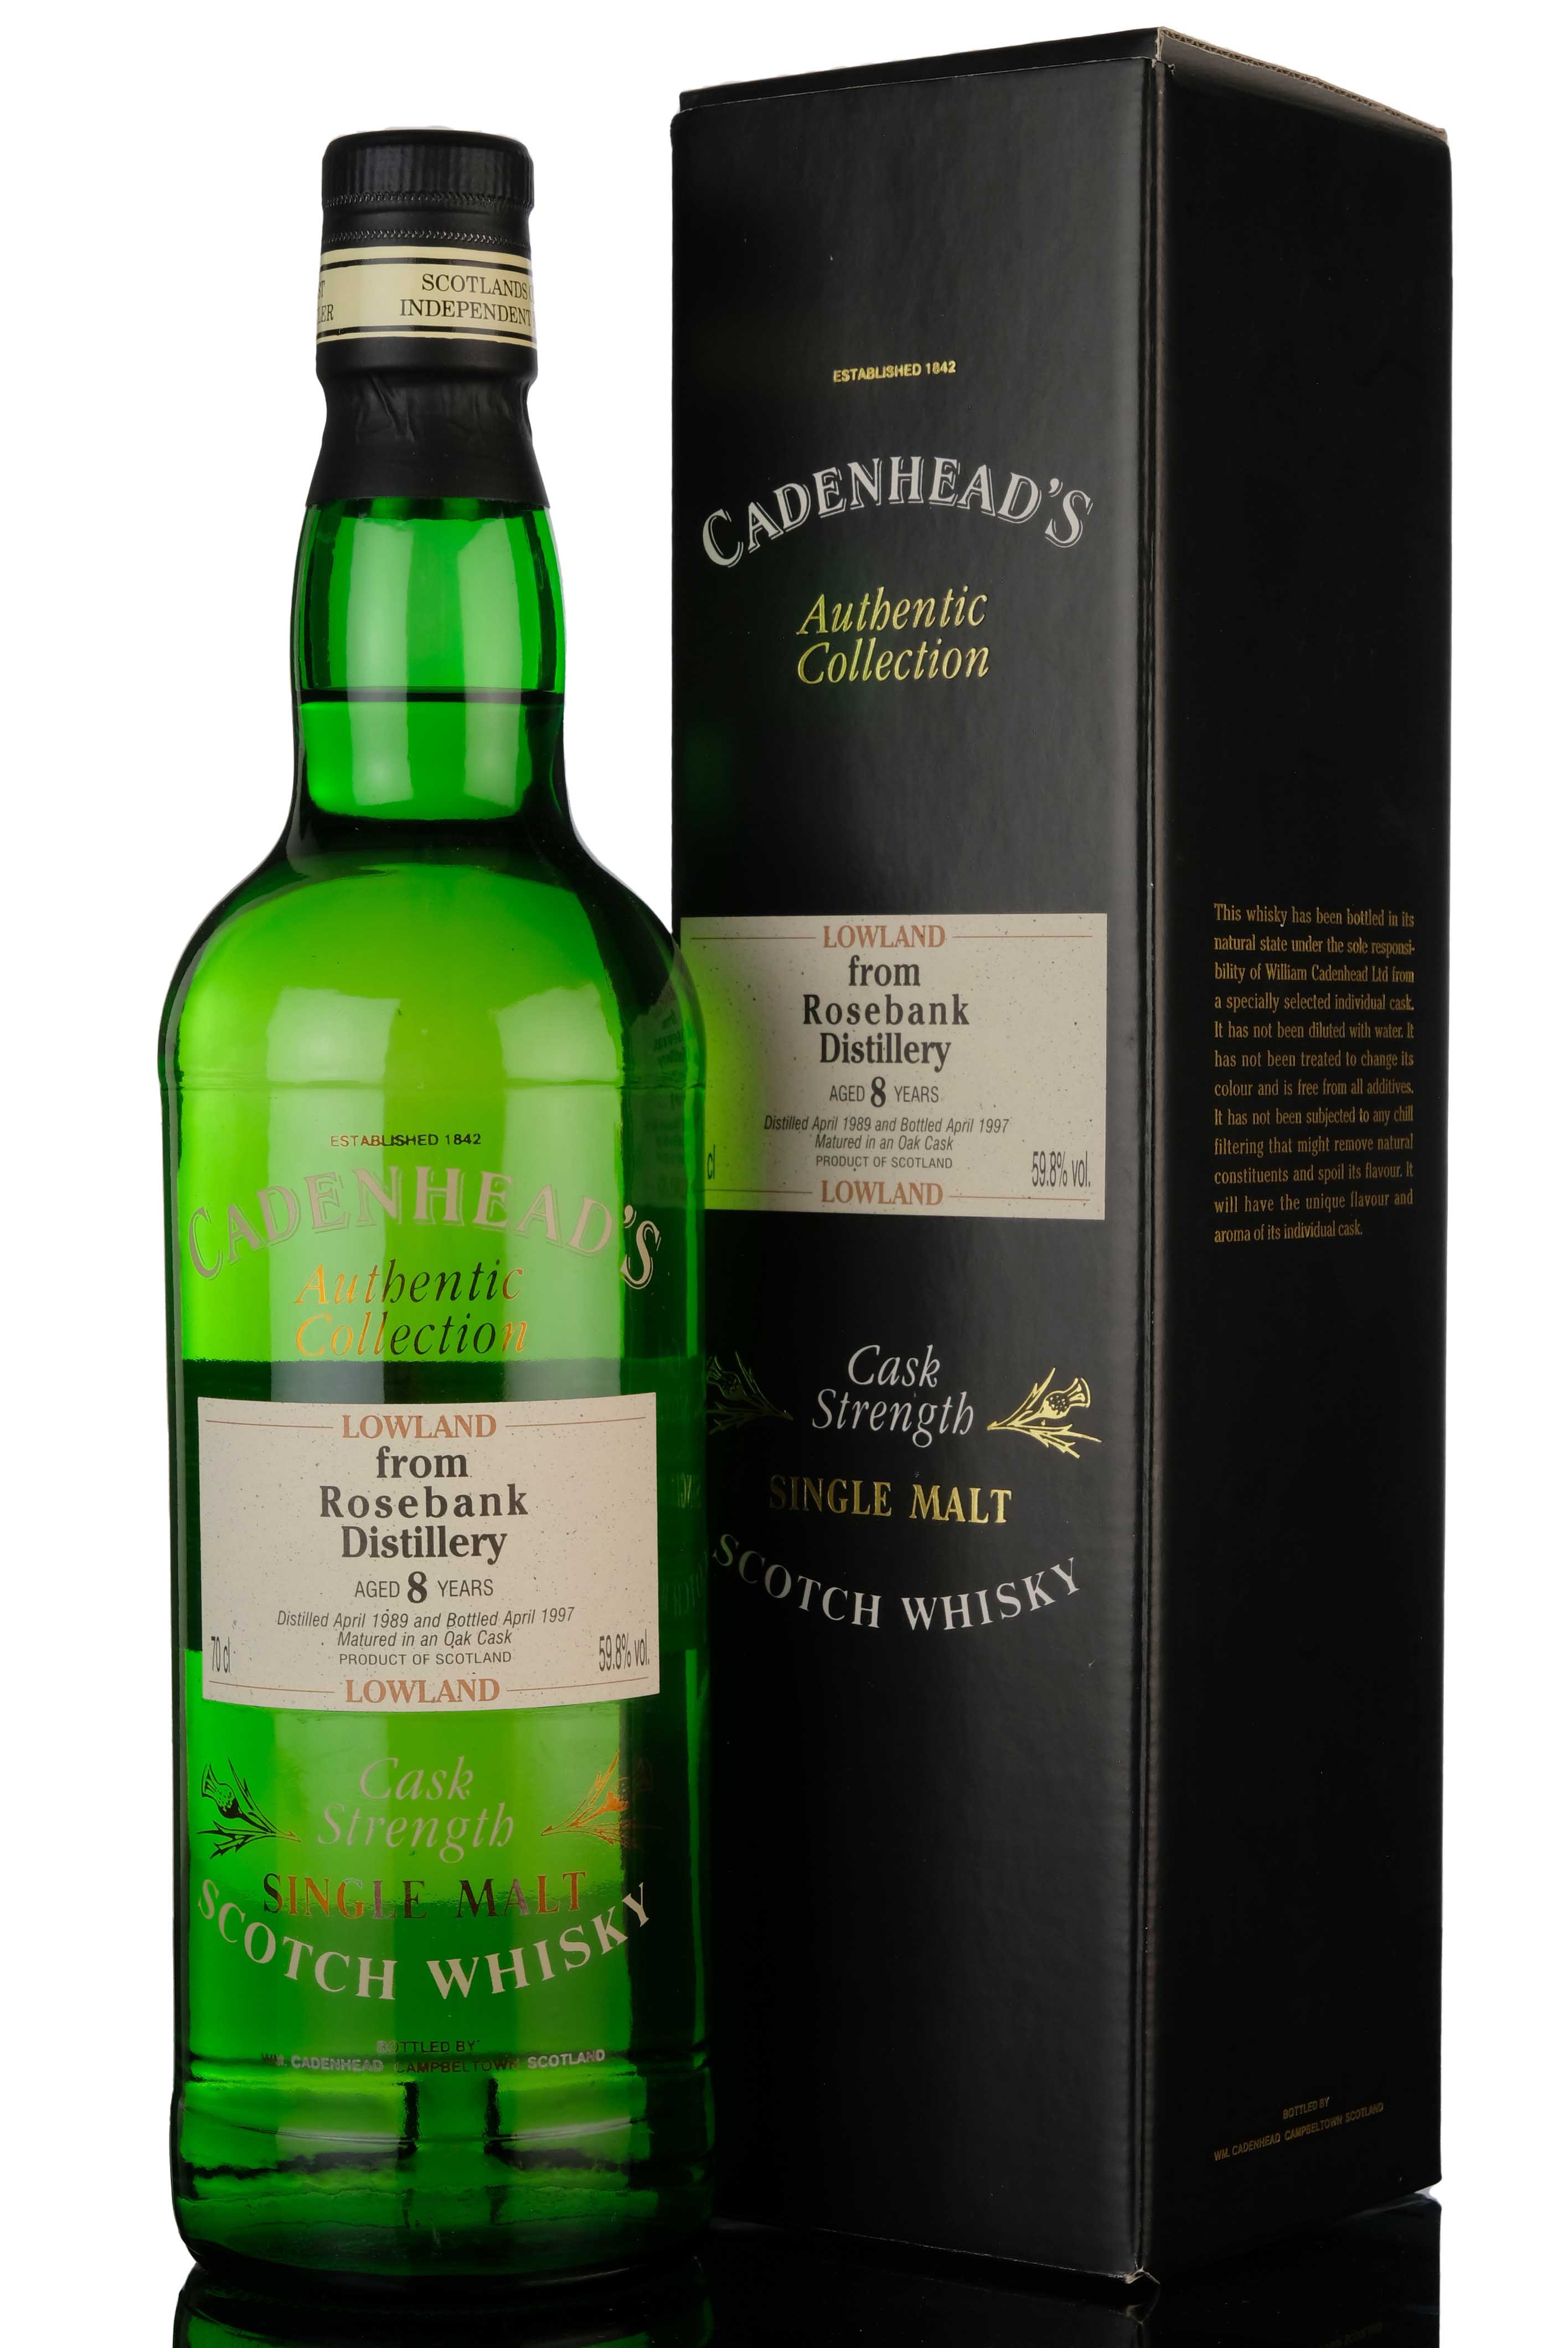 Rosebank 1989-1997 - 8 Year Old - Cadenheads Authentic Collection